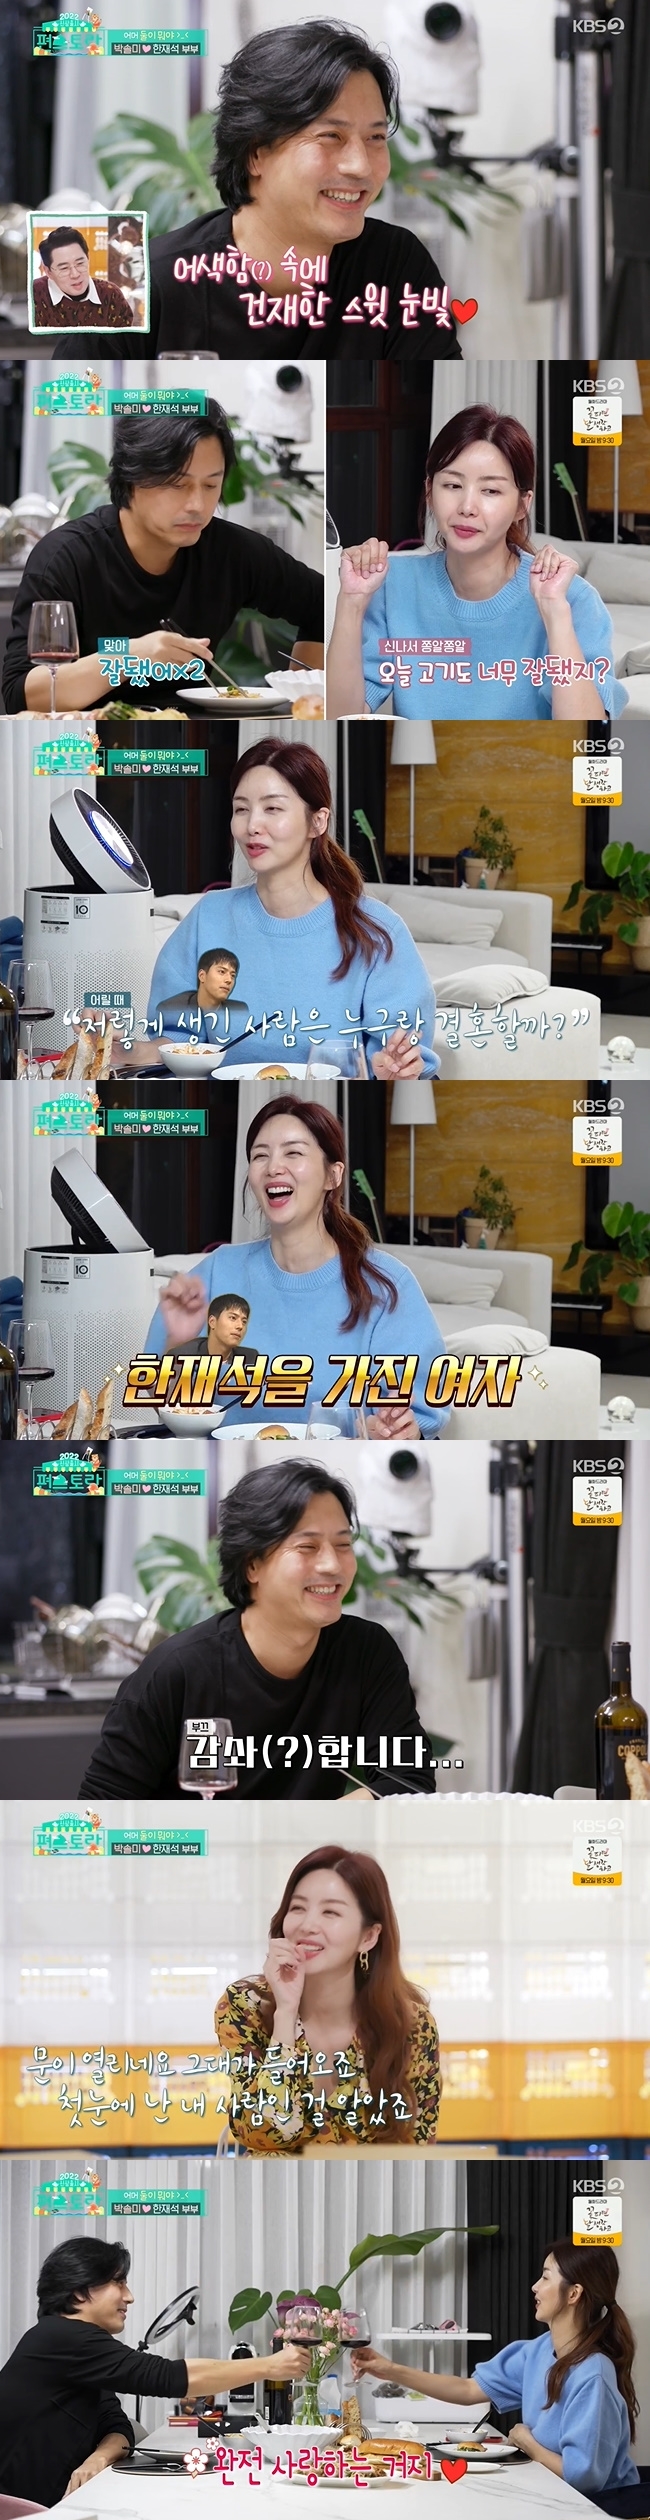 Han Jae-suk appeared on an entertainment program after more than five years.Park Sol-mi and Han Jae-suk enjoyed a home party on KBS 2TV Stars Top Recipe at Fun-Staurant broadcast on January 7.Park Sol-mi called Han Jae-suk to the table after completing the Poltfork Burger, Gansos Pasta and Foldfork sea chiefstu.Han Jae-suk, who first met Park Sol-mi in Gangsang Kim Man-duk and married Park Sol-mi in 2013, appeared in entertainment for the first time in five years.Im calling him without knowing what Husband is shooting, but hes sweating a lot, Park Sol-mi said.Tensioned Han Jae-suk took a friendly photo with Park Sol-mi with an awkward look and tasted it from stew.Han Jae-suk praised Park Sol-mis food skills by inhaling storms following the stew to Foldfork patty burgers and soy sauce pasta.Park Sol-mi, who looked at Han Jae-suk with a dripping eye, said, When I was a child, I thought, Who does that look like?Han Jae-suk shyly replied, Thank you. In the studio, Park Sol-mi said, Its not funny because I like it, but it feels like, Why is that guy in my house?I didnt like that style, he said.Park Sol-mi recalled the surprise of Han Jae-suks appearance when he first met, I had never seen it before, but I met it for the first time on the day of reading.Later, my brother said, I opened the door and thought I should marry him.Han Jae-suk, who was looking for children in a shyness, replied, I am working and I am such a Model Behavior. Park Sol-mi said, No.I spent 10 years knowing that, Han Jae-suk said, No. Model Behavior, which we have become increasingly like this.I love Model Behavior, he said.